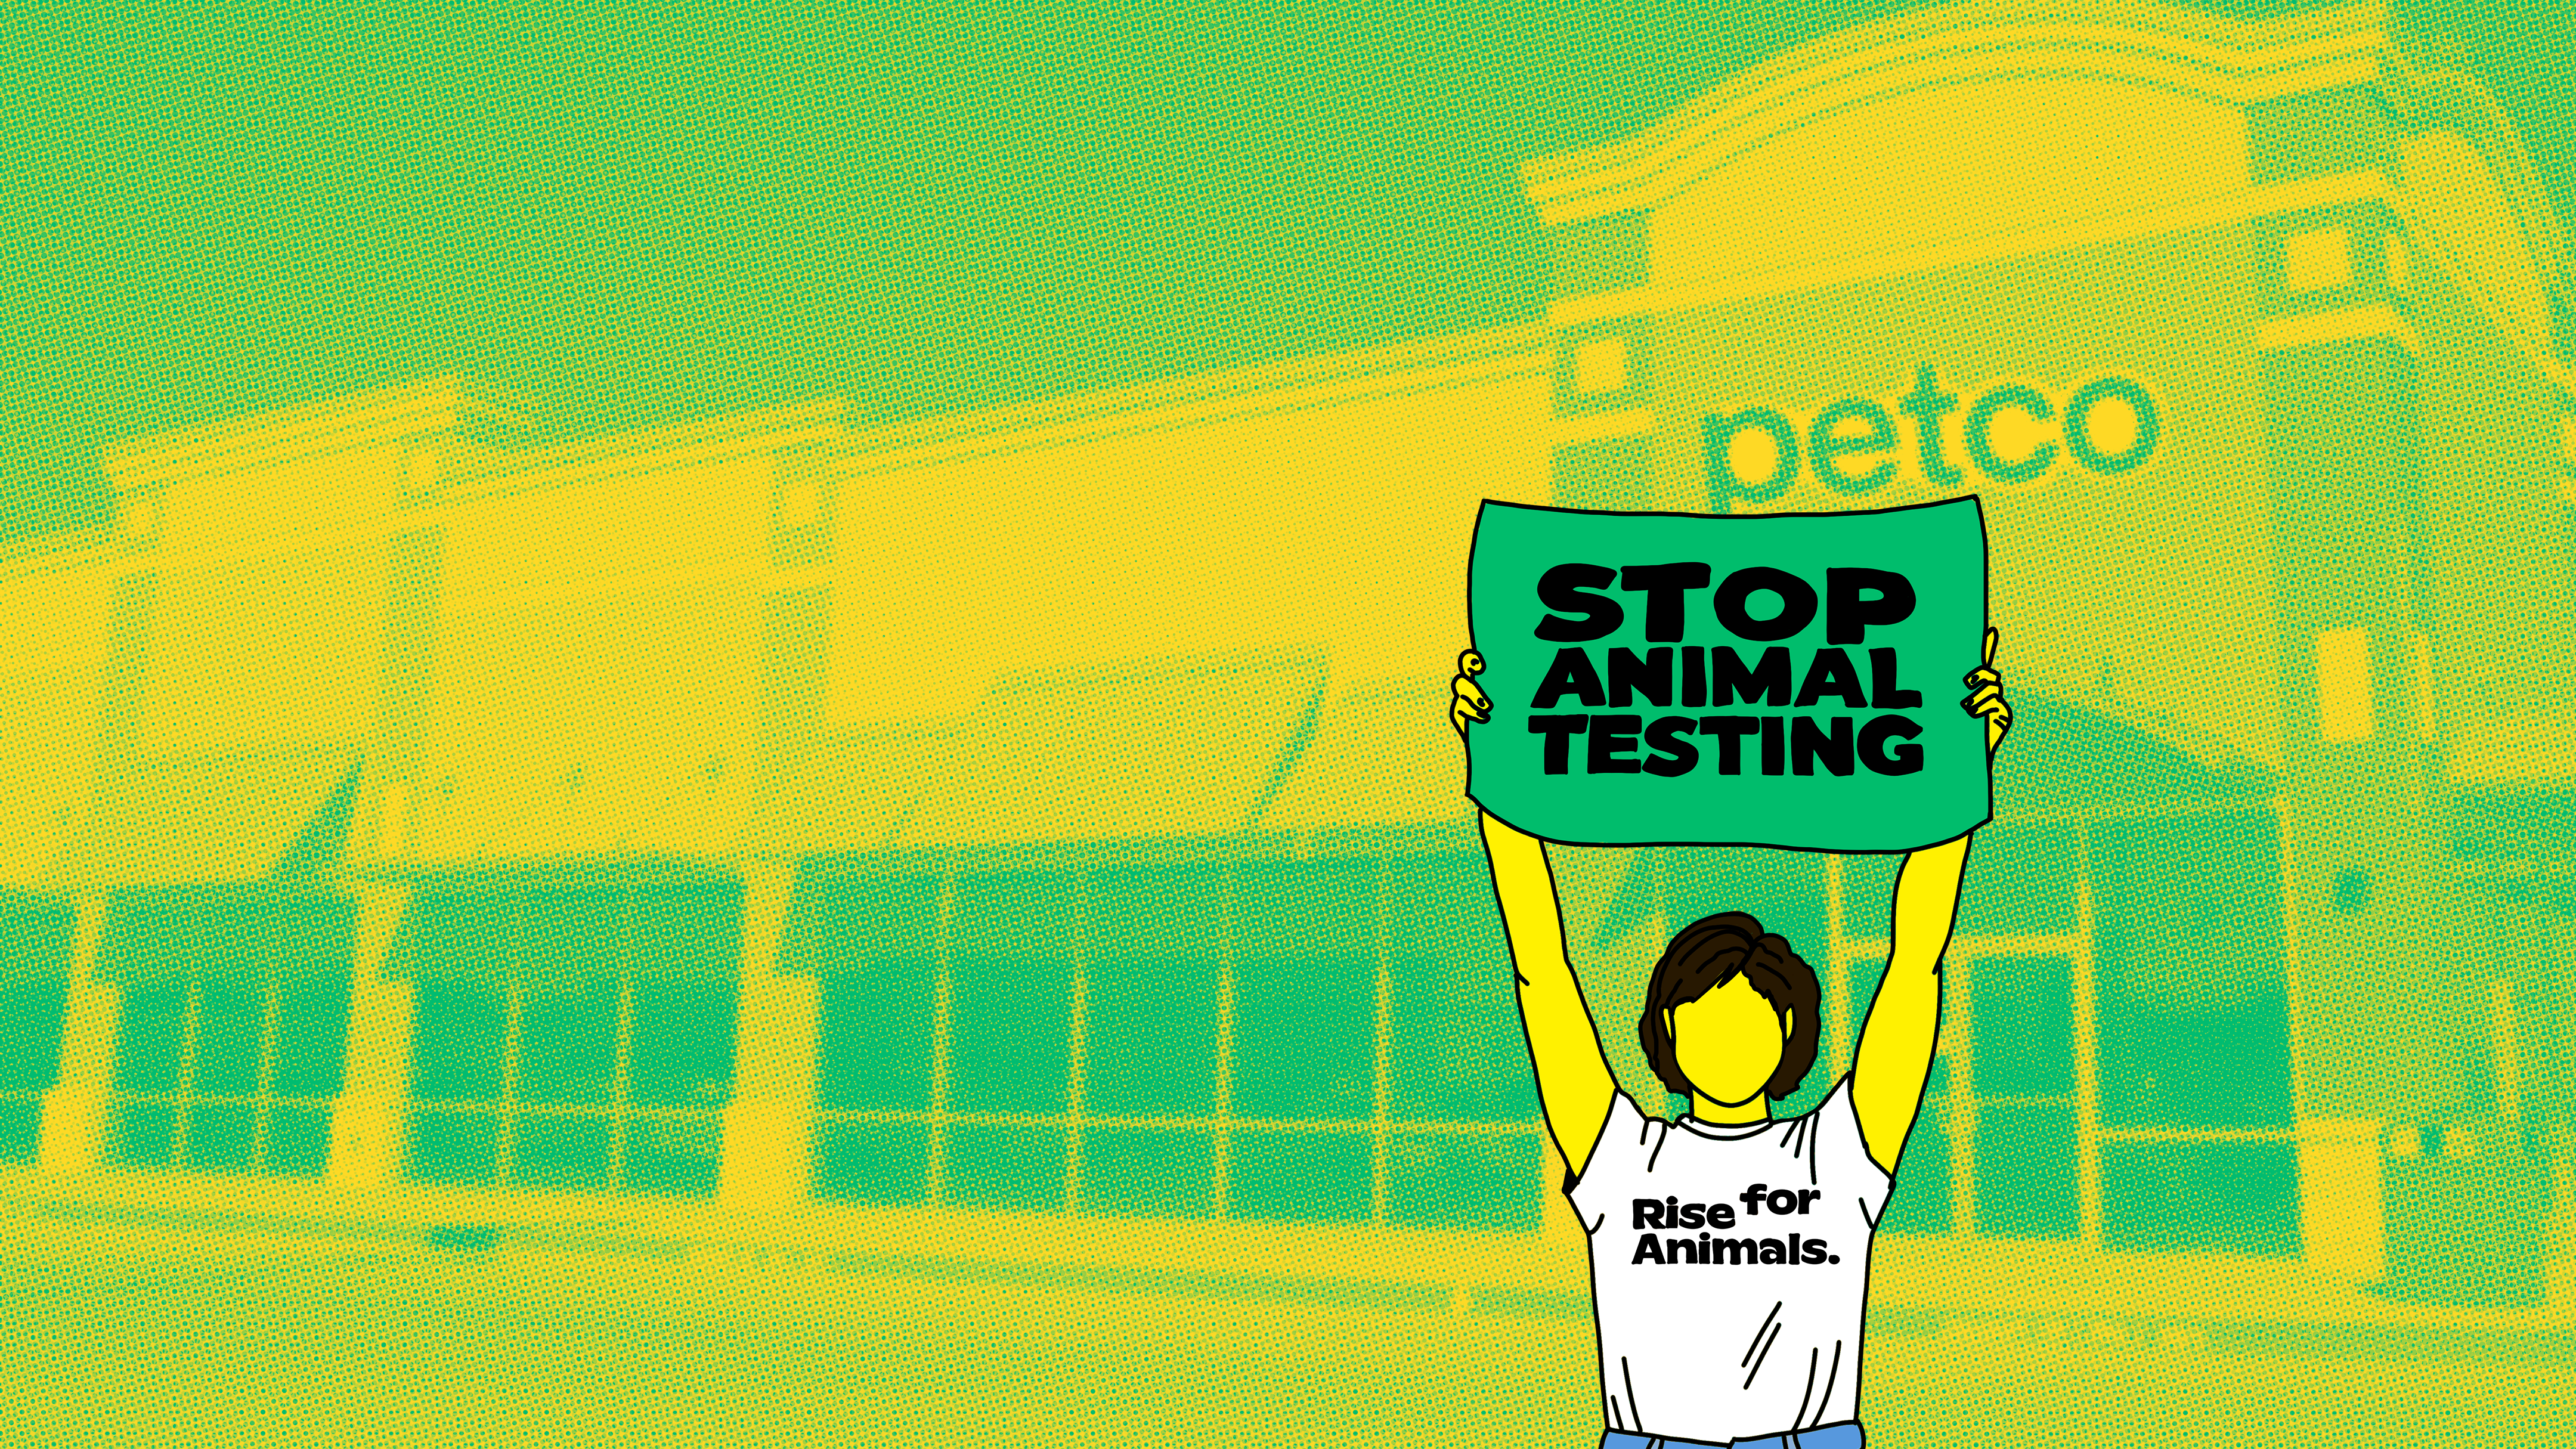 An illustration of an activist holding a "STOP ANIMAL TESTING" sign in front of a pet store